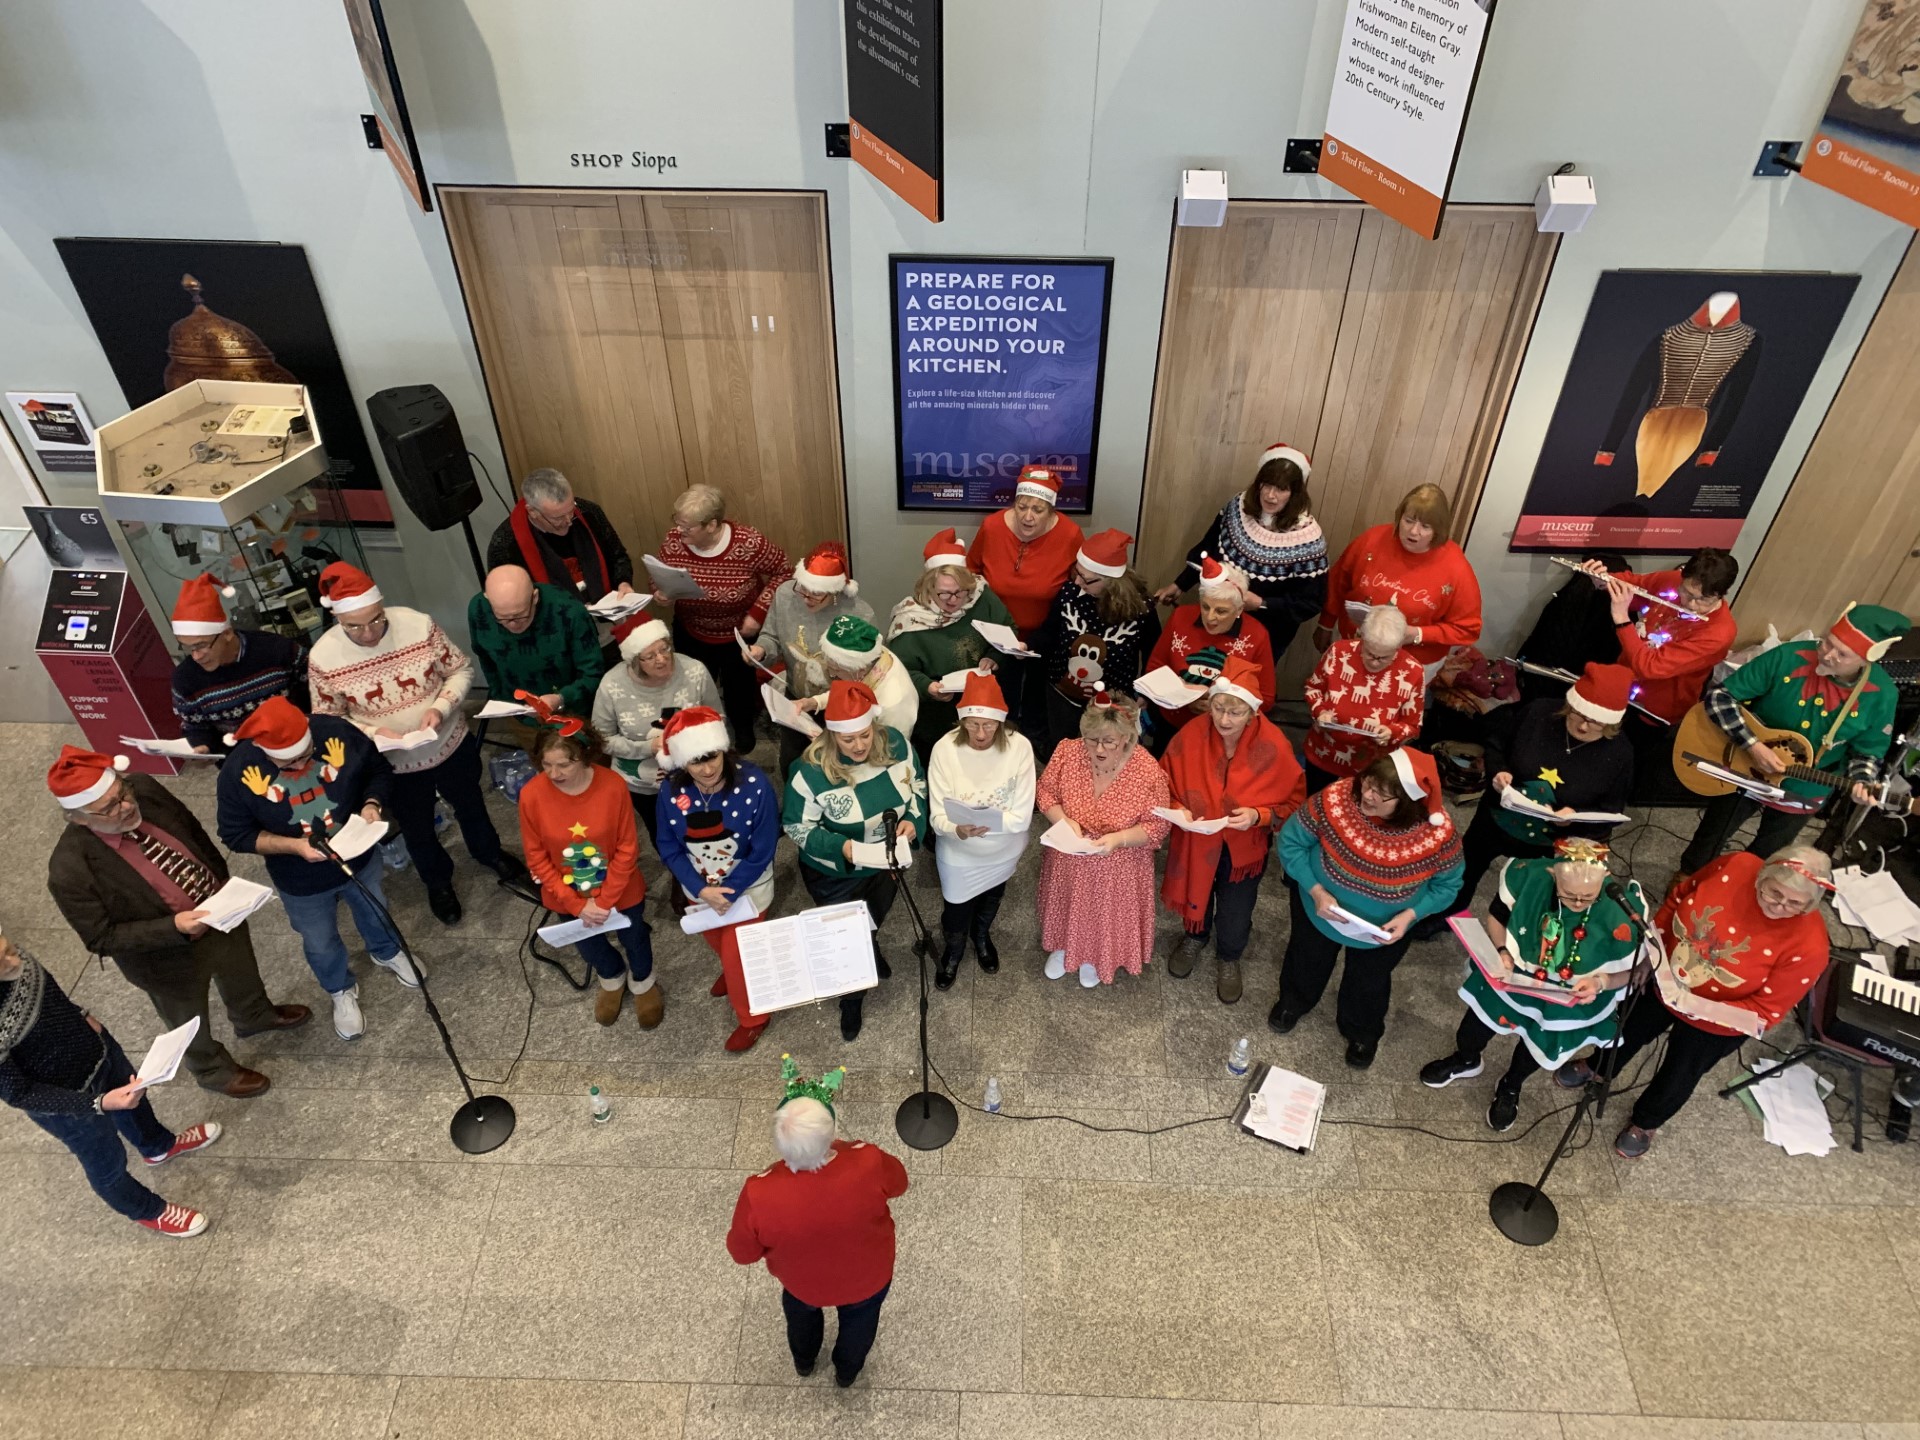 St. Michael's Reunion Choir Performance, a small choir standing in a semi circle with a conductor at the front facing them, seen from above looking down, some wearing christmas jumpers or santa hats.